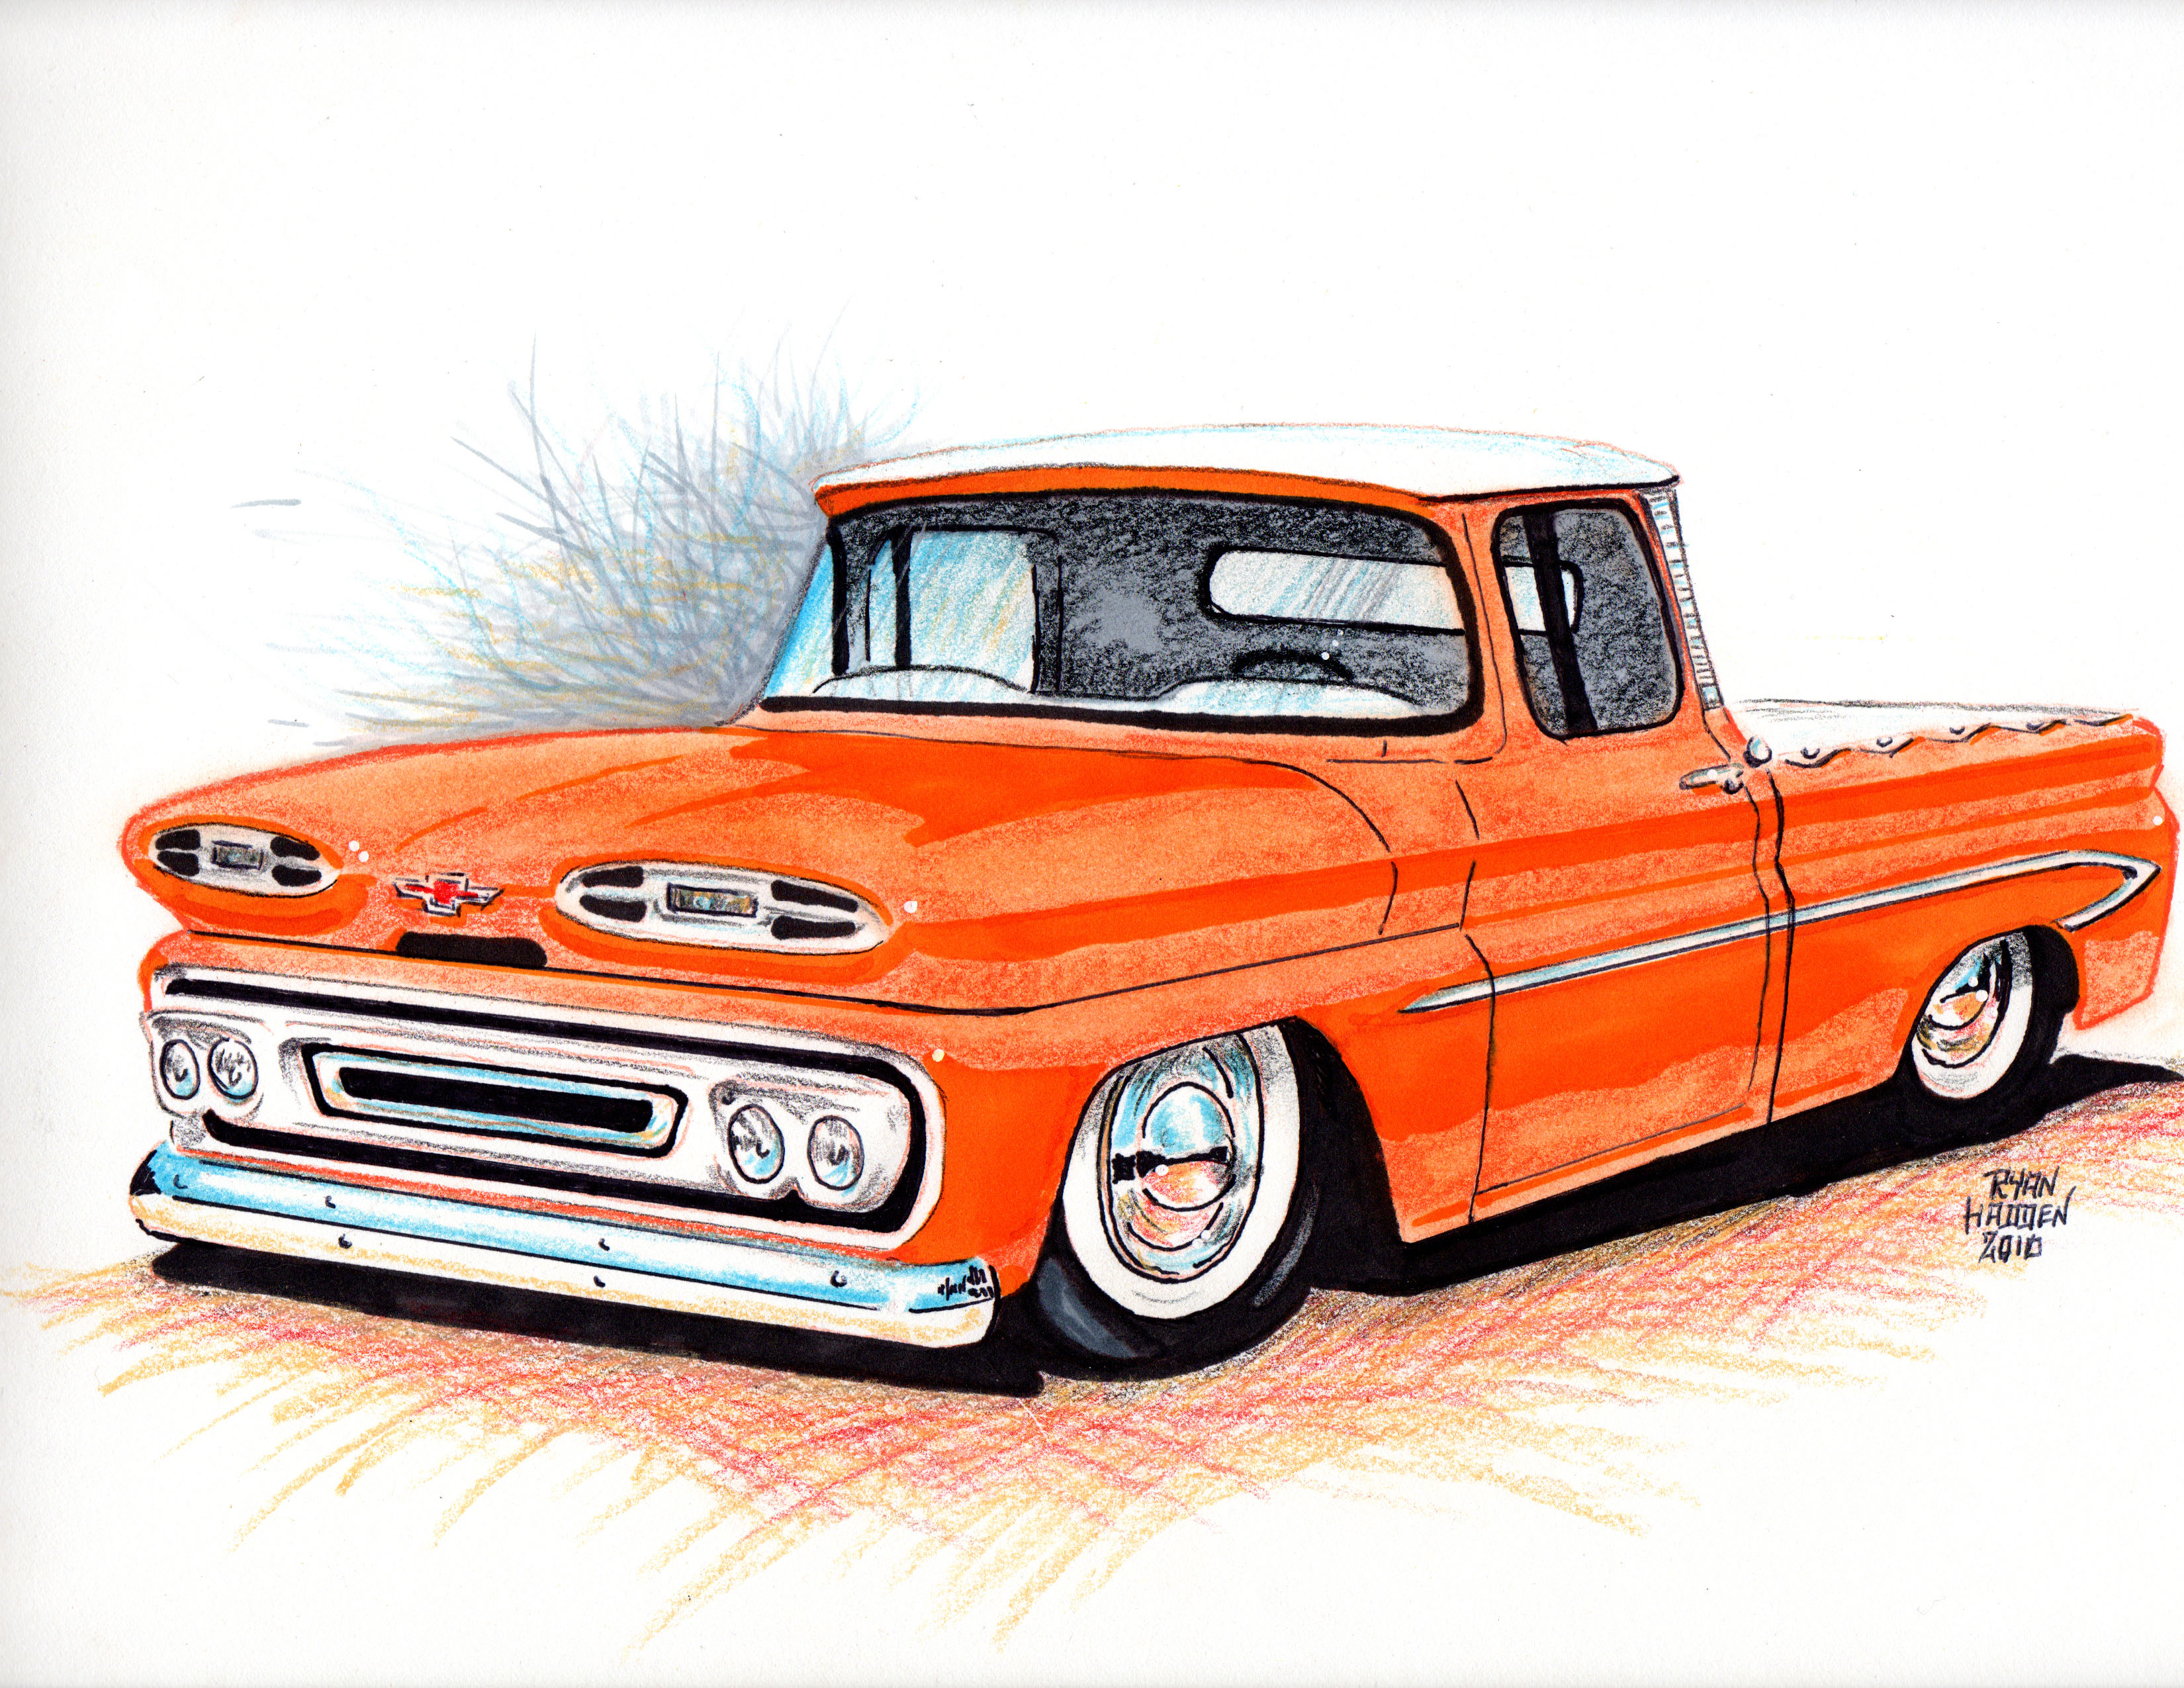 How to draw a lowrider truck step by step